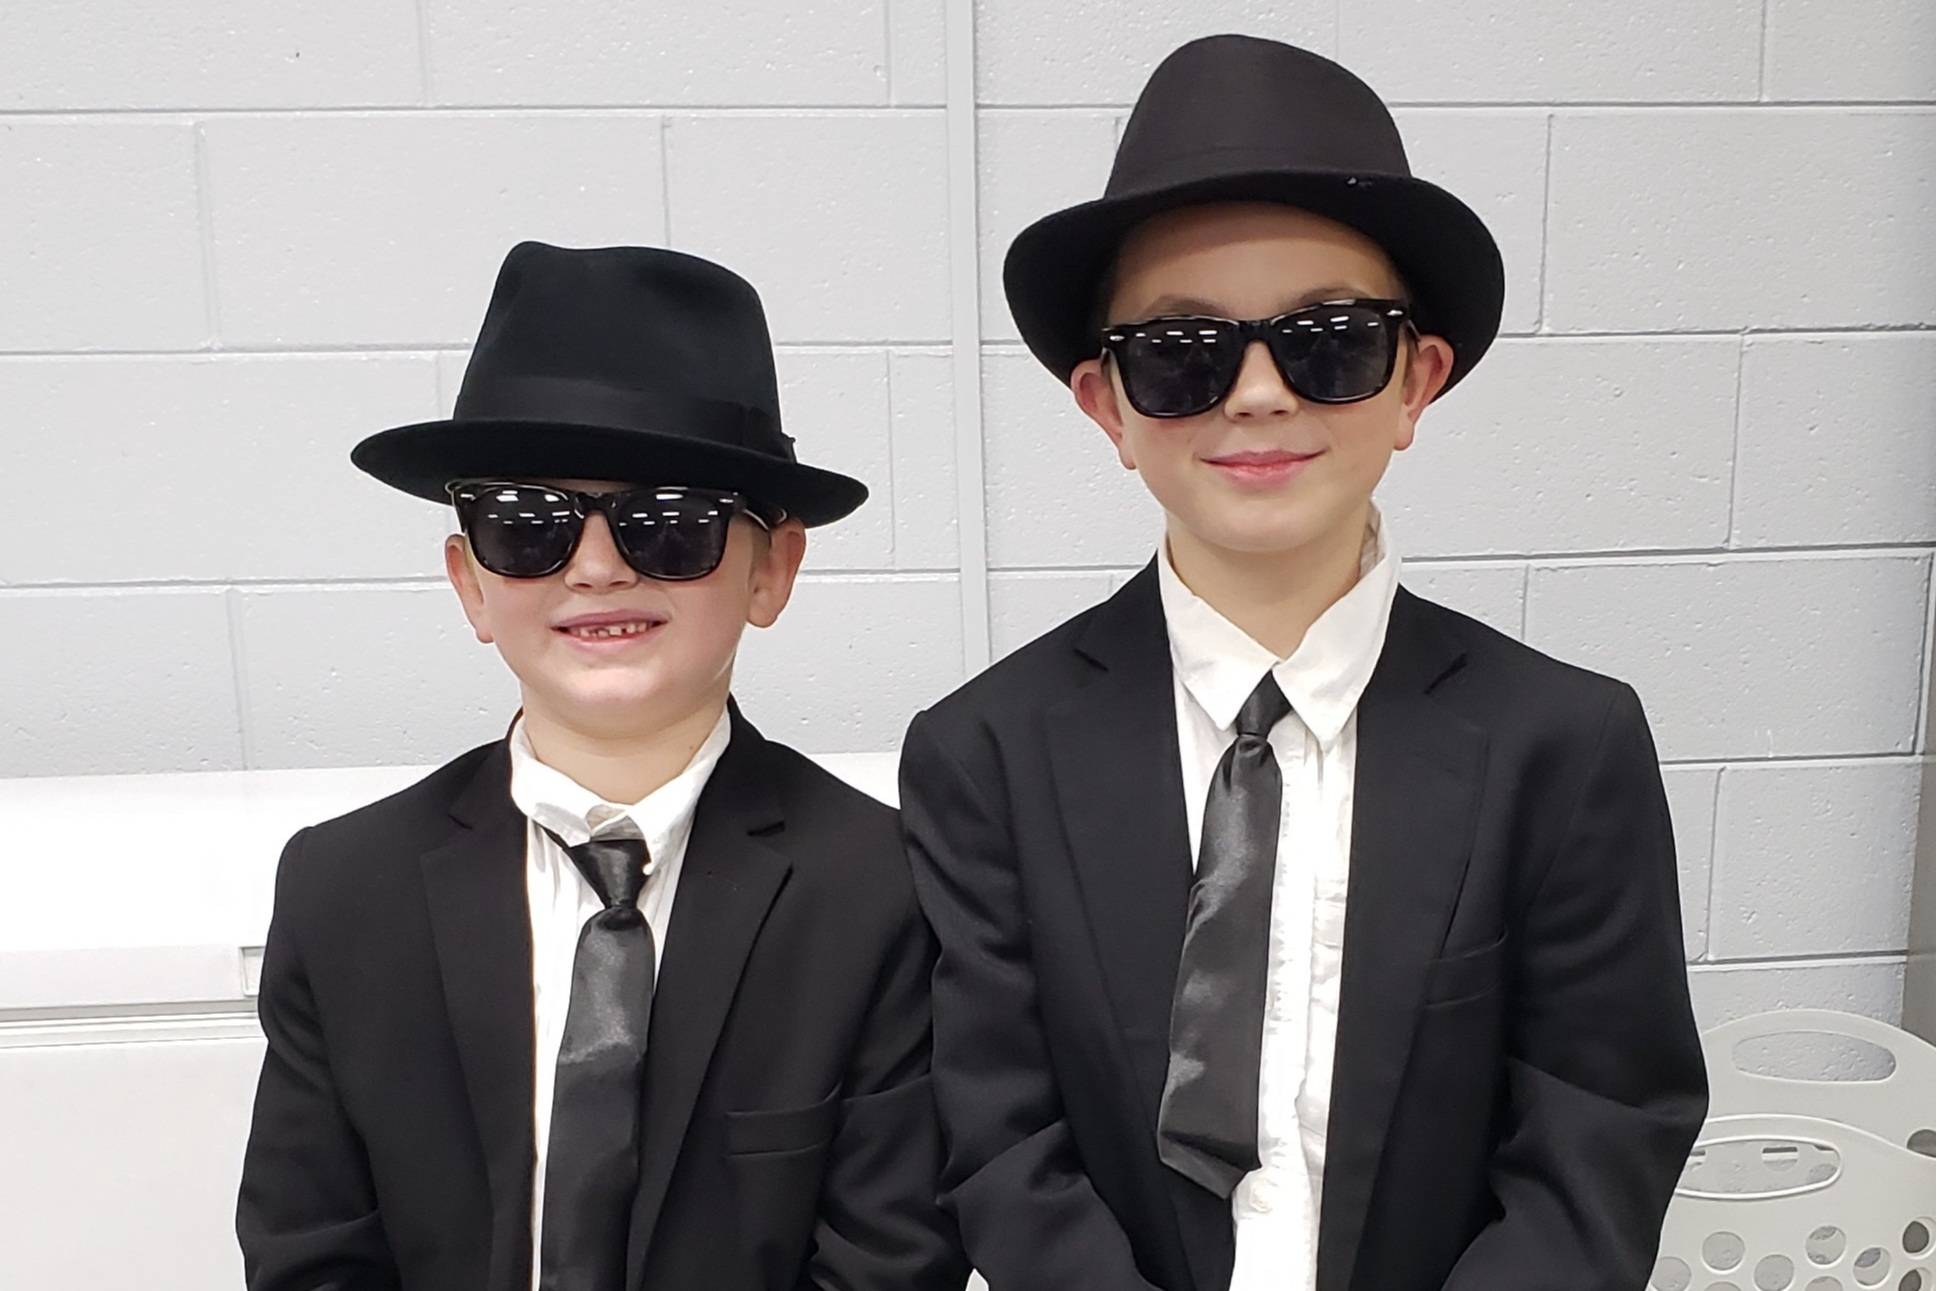 Students dressed as the Blues Brothers for Halloween at Jeneir